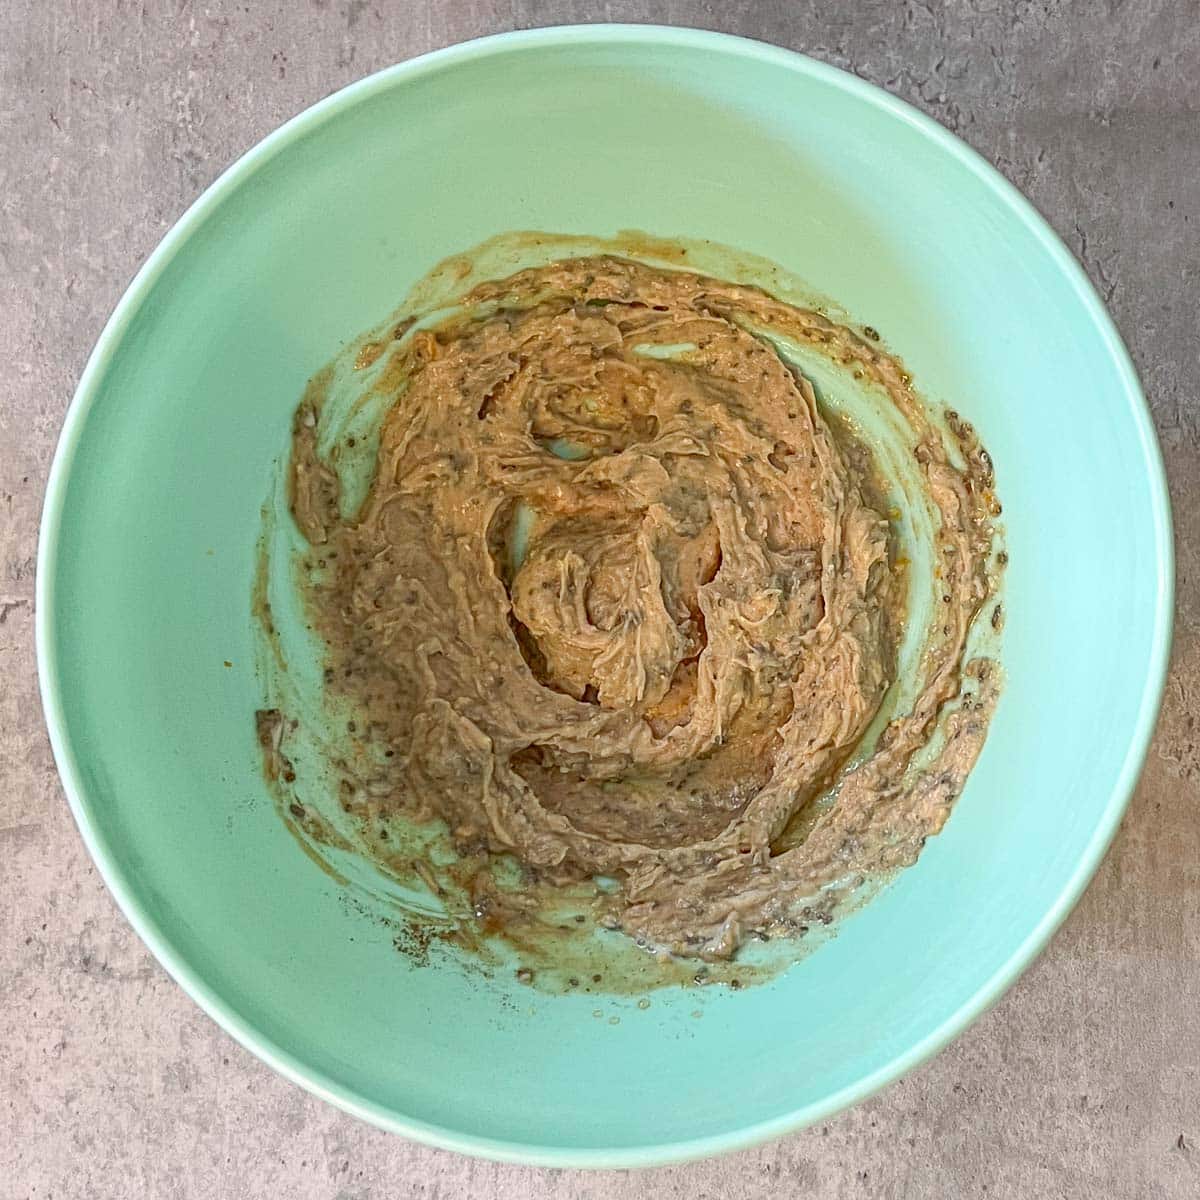 chia seeds, oramge zest, vanilla, maple syrup, spices, cashew butter mixed together in bowl